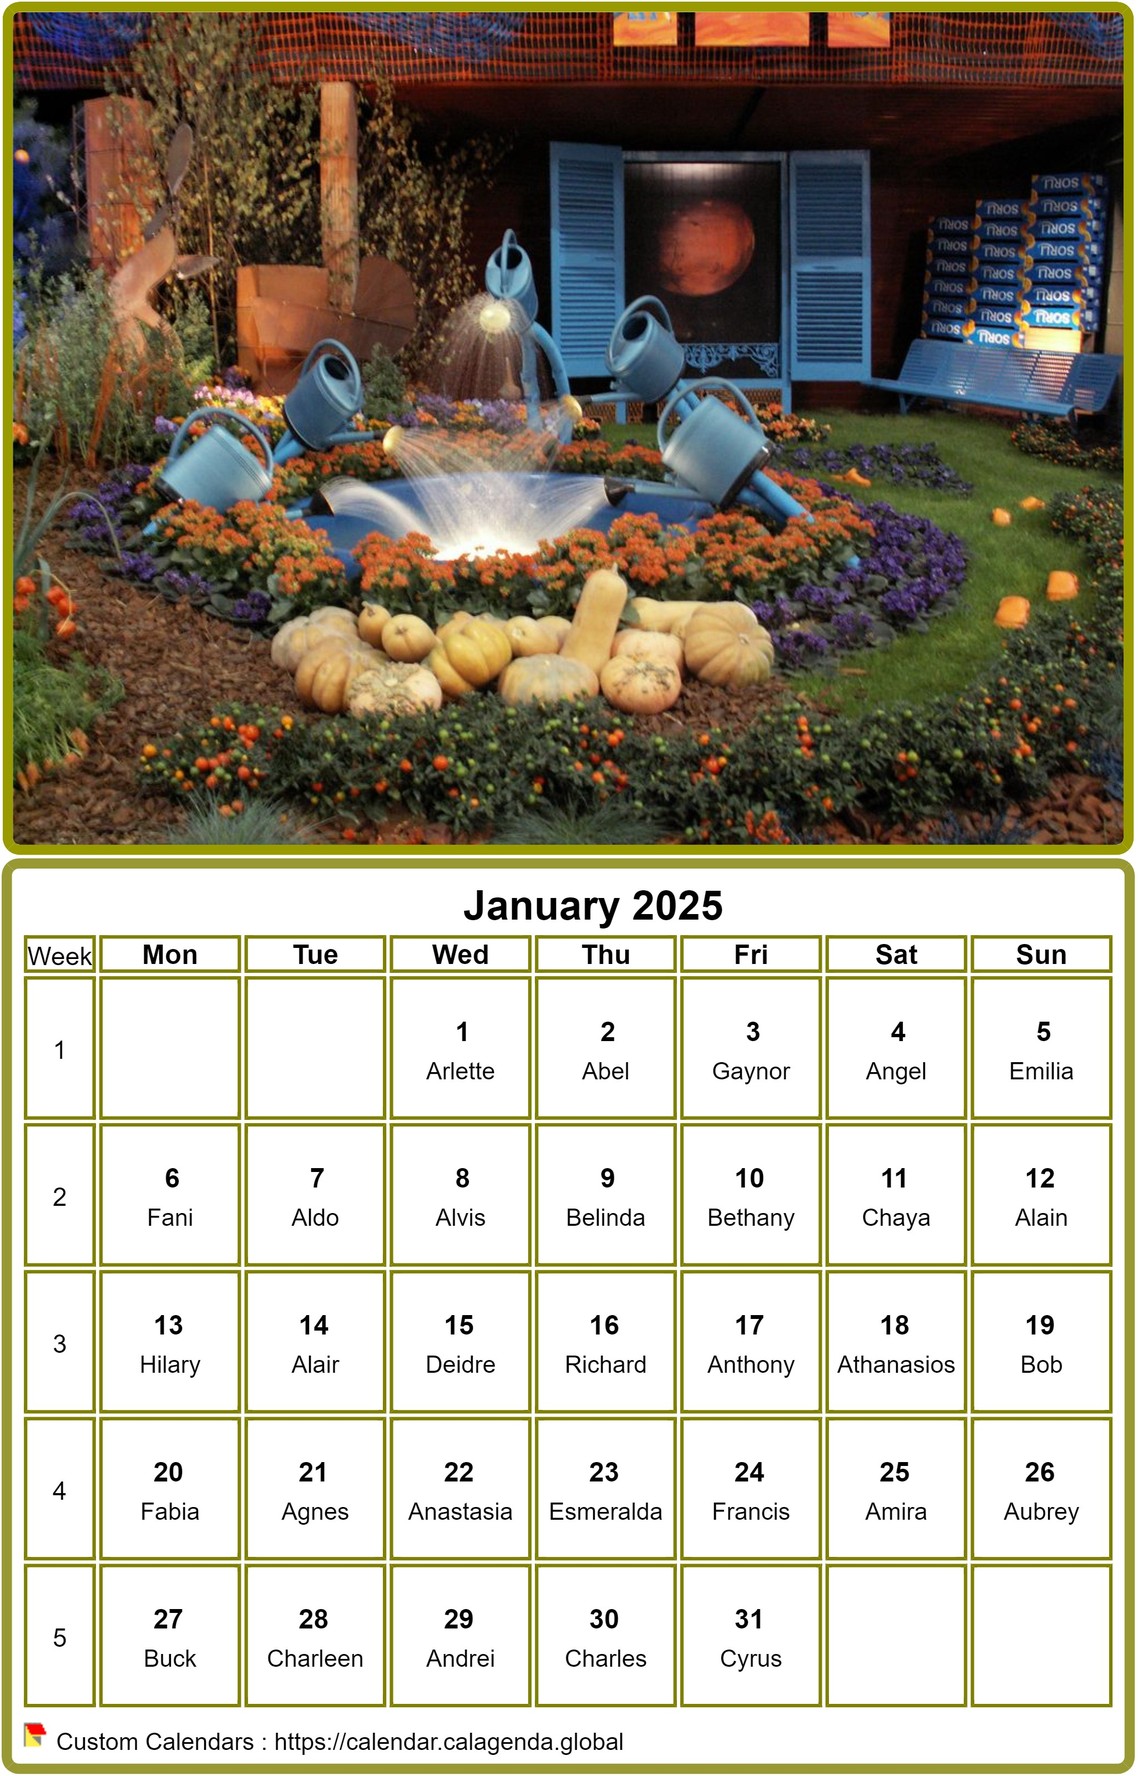 Calendar 2025 to print, monthly, with photo at the top